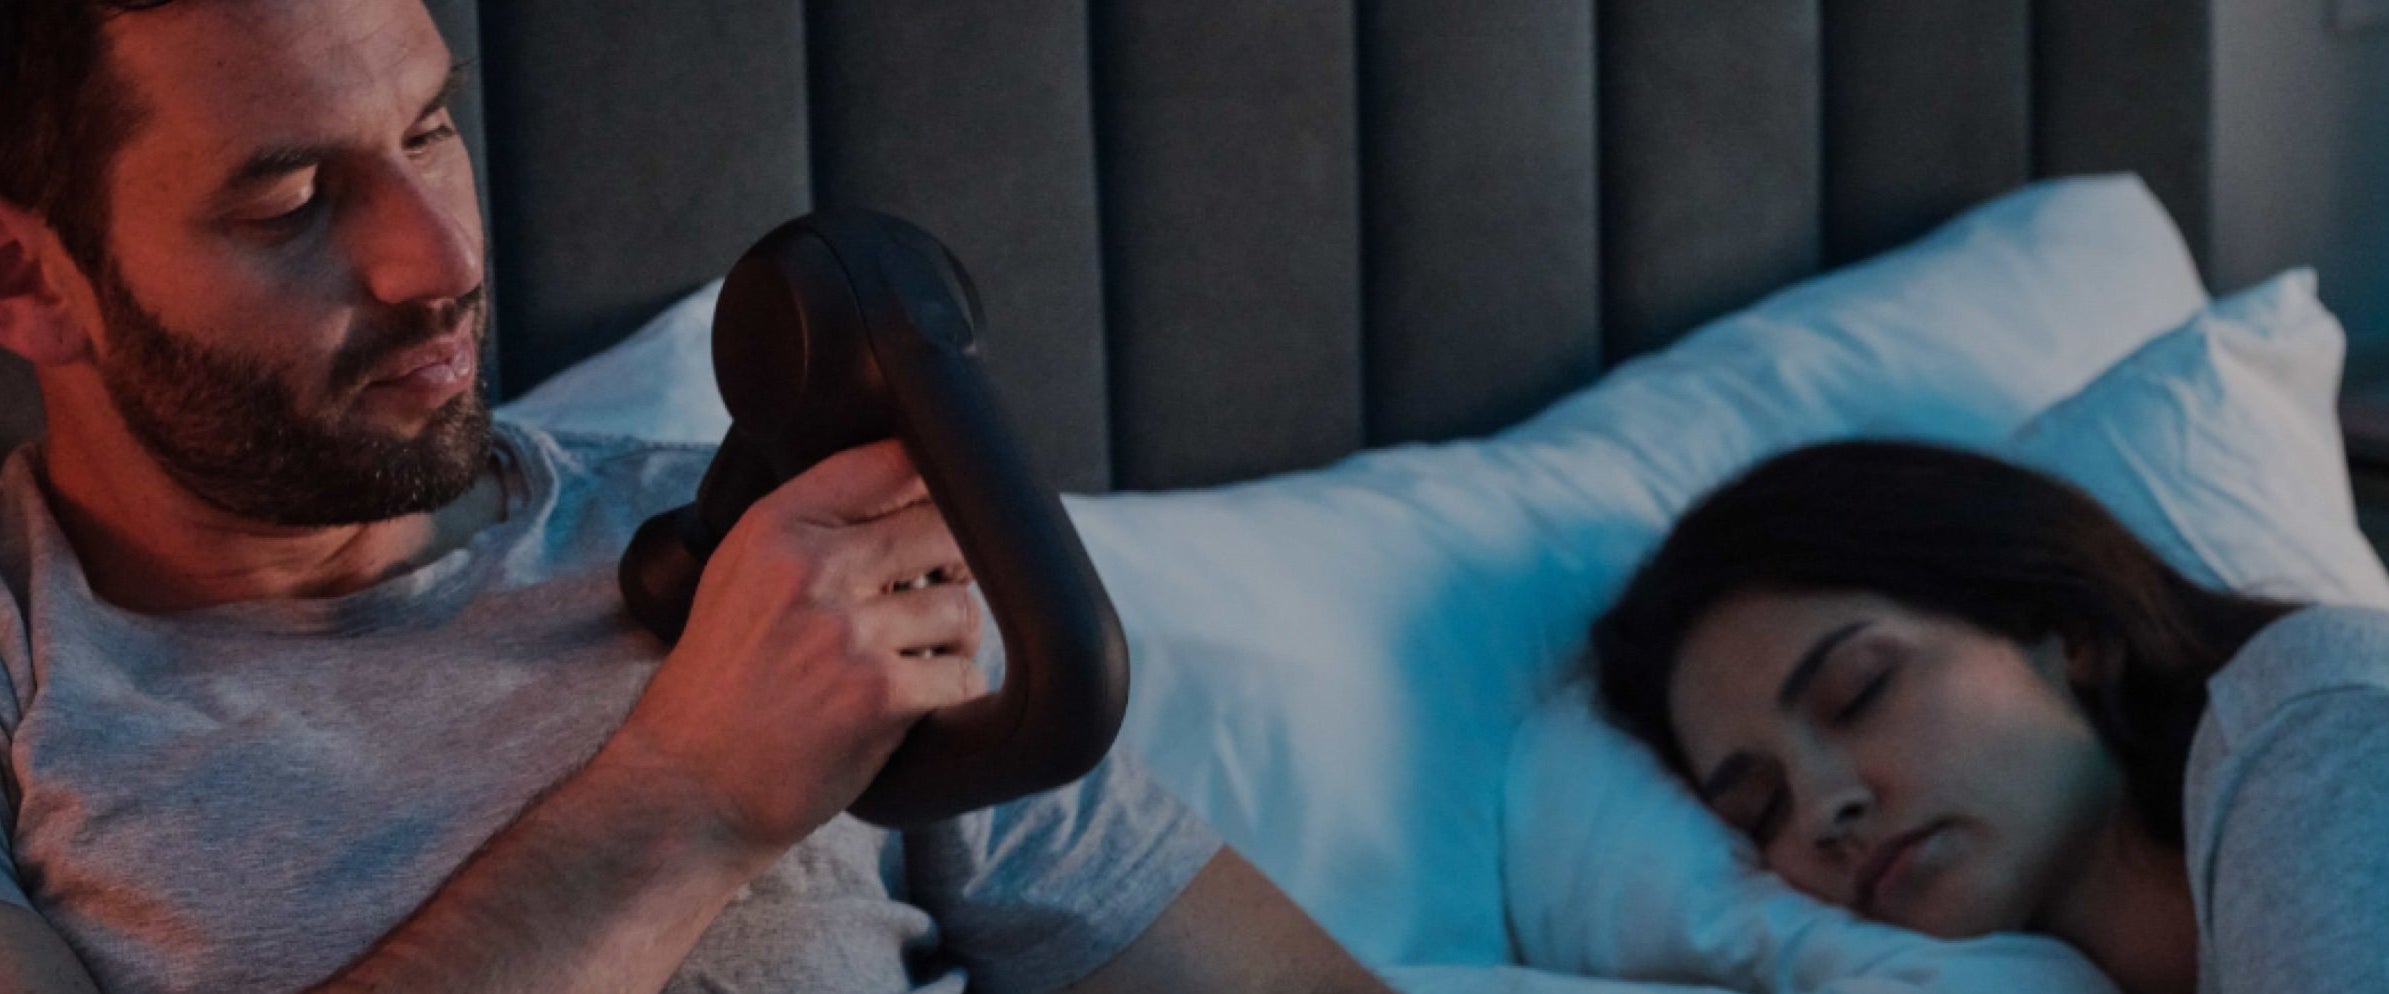 model holding the Theragun machine with a handle and ball at the end on their shoulder with another model asleep in bed next to them